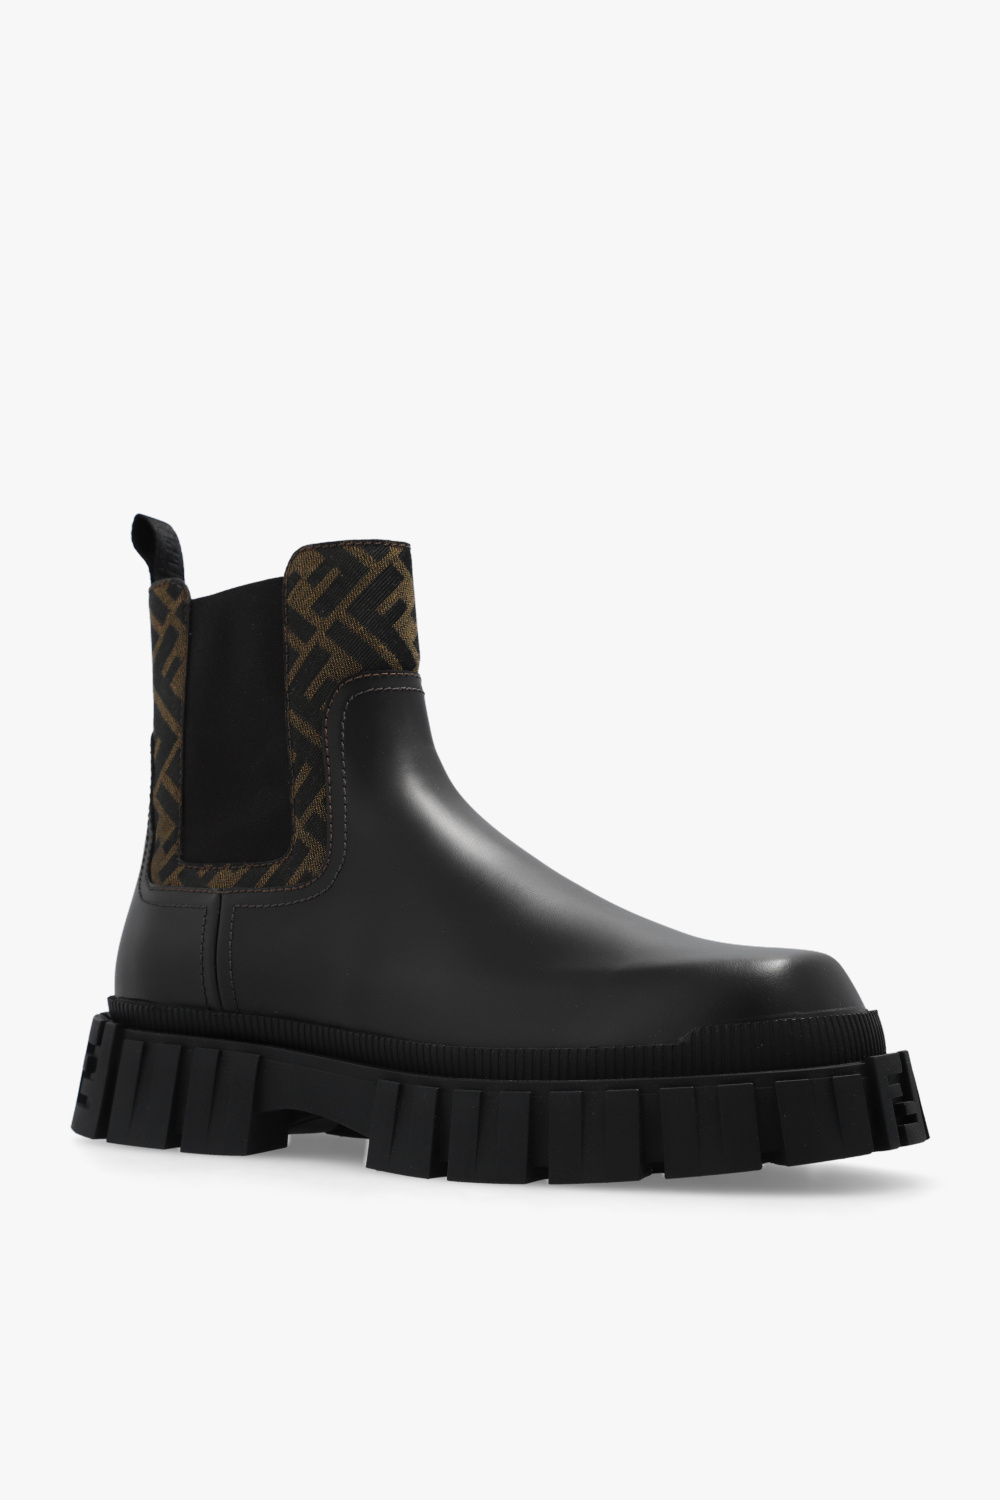 Fendi Leather ankle boots with monogram